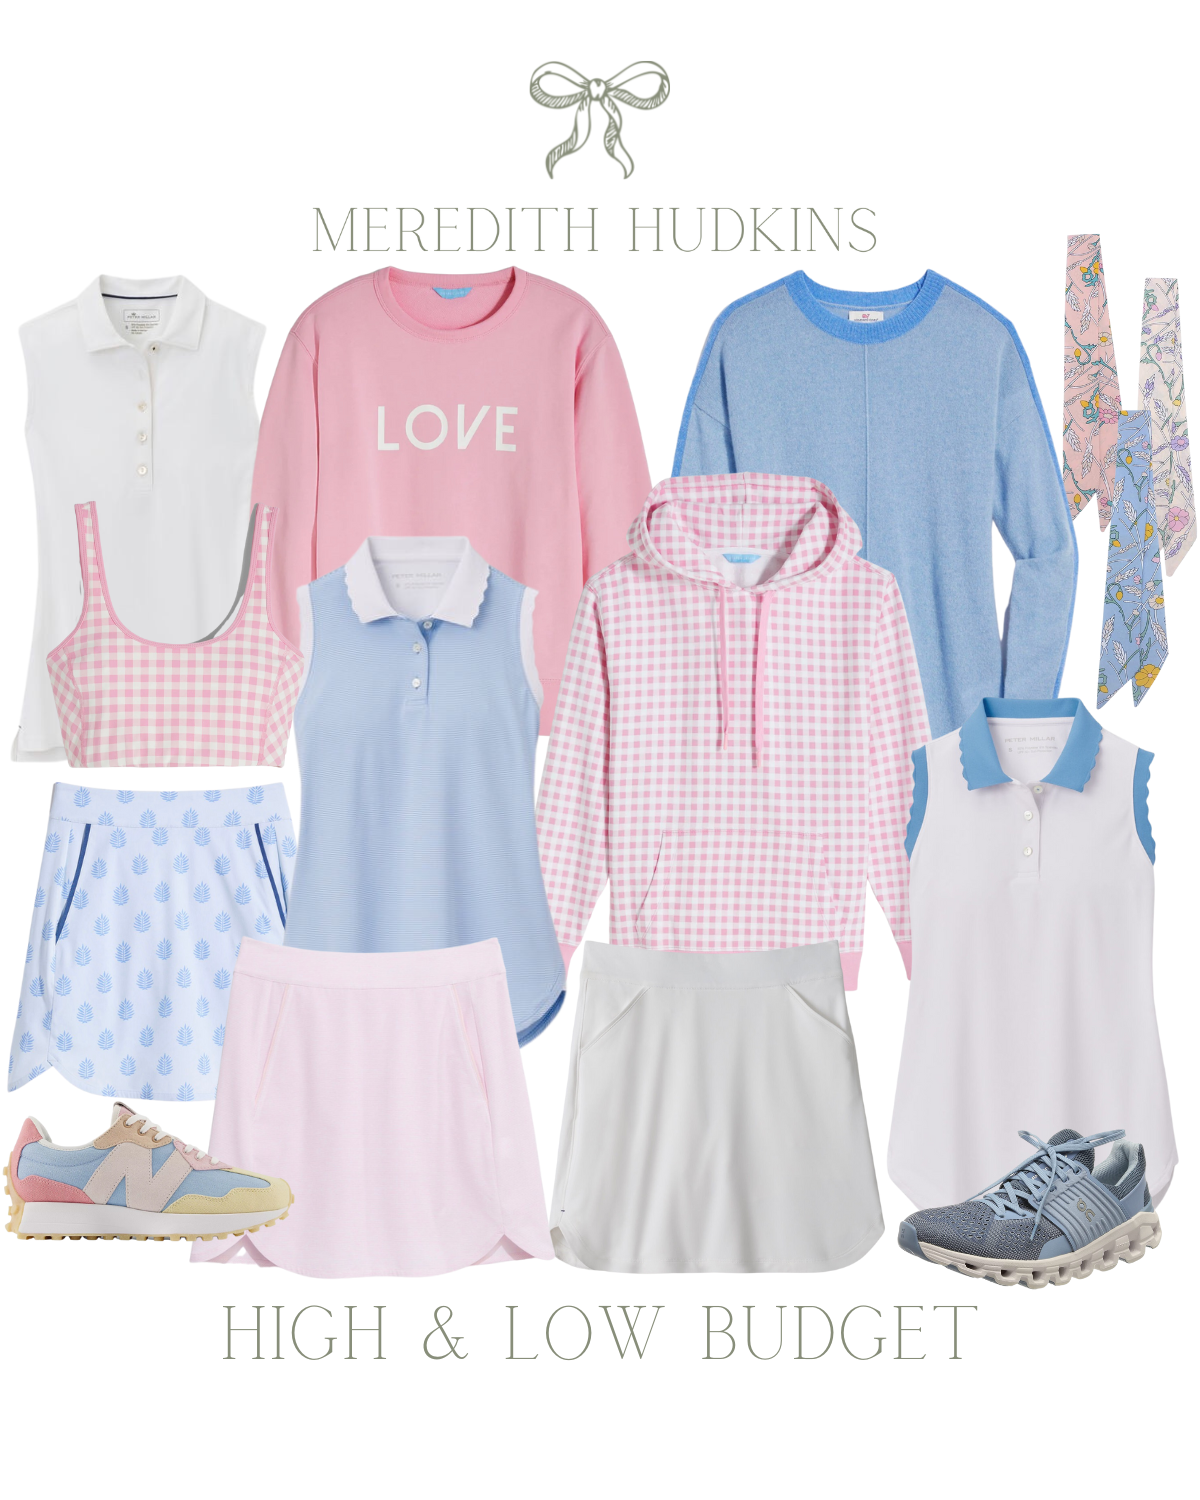 high and low budget fashion finds13.png